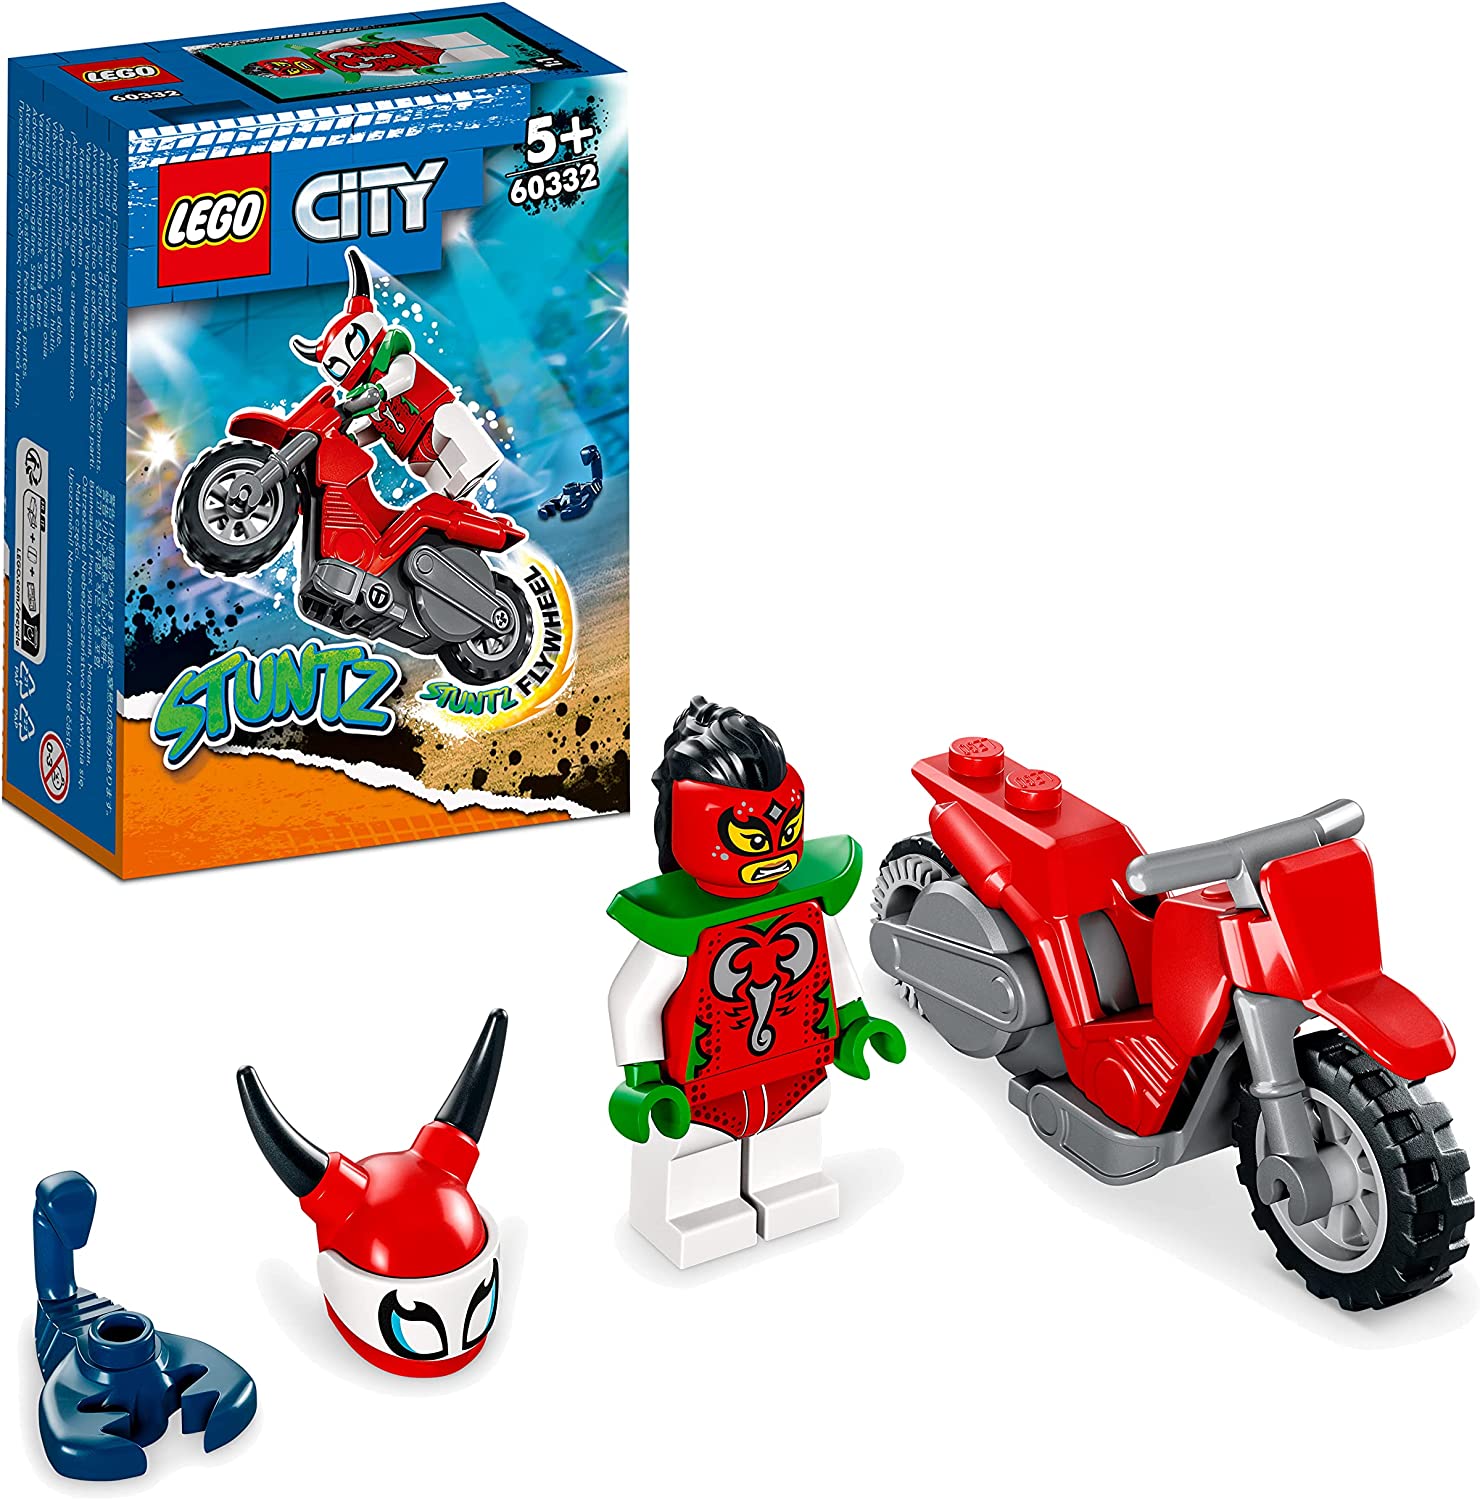 LEGO 60332 City Stuntz Scorpion Stunt Bike Set with Motorcycle and Mini Figure, Action Toy as a Gift for Children from 5 Years